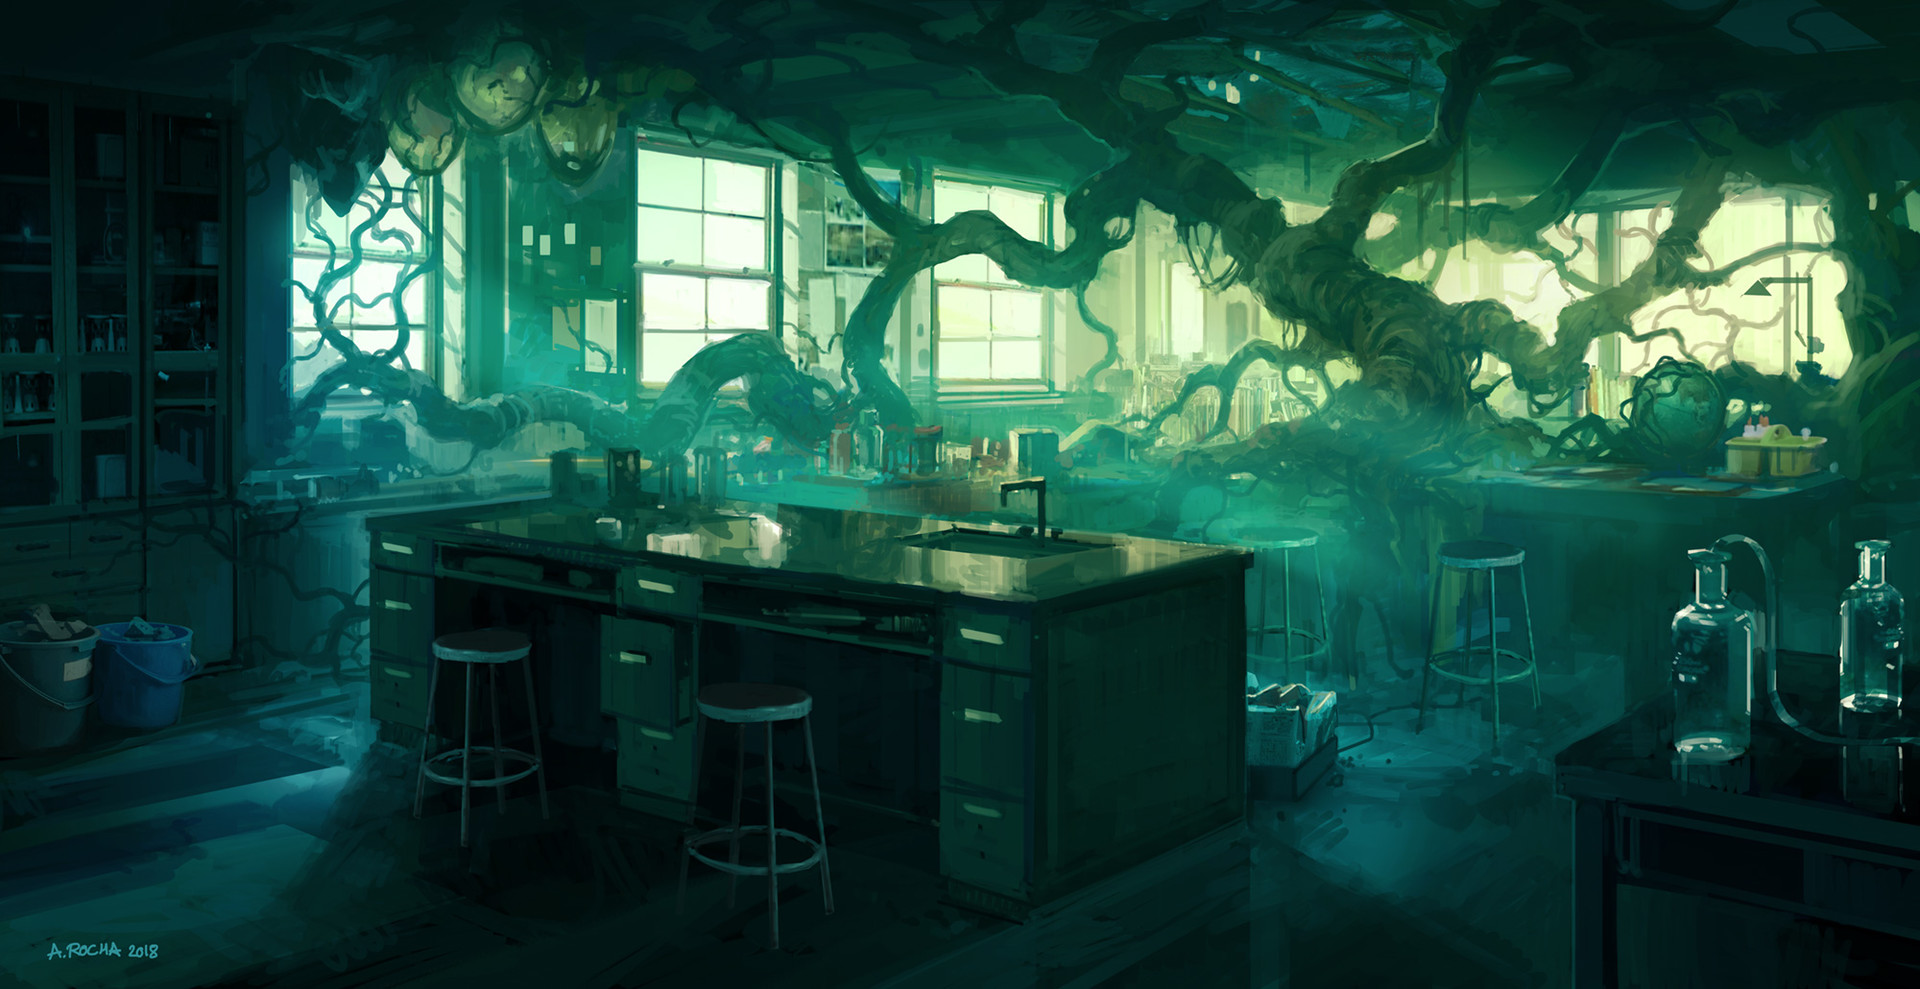 General 1920x989 Andreas Rocha nature trees twigs laboratories chair table bottles school trash